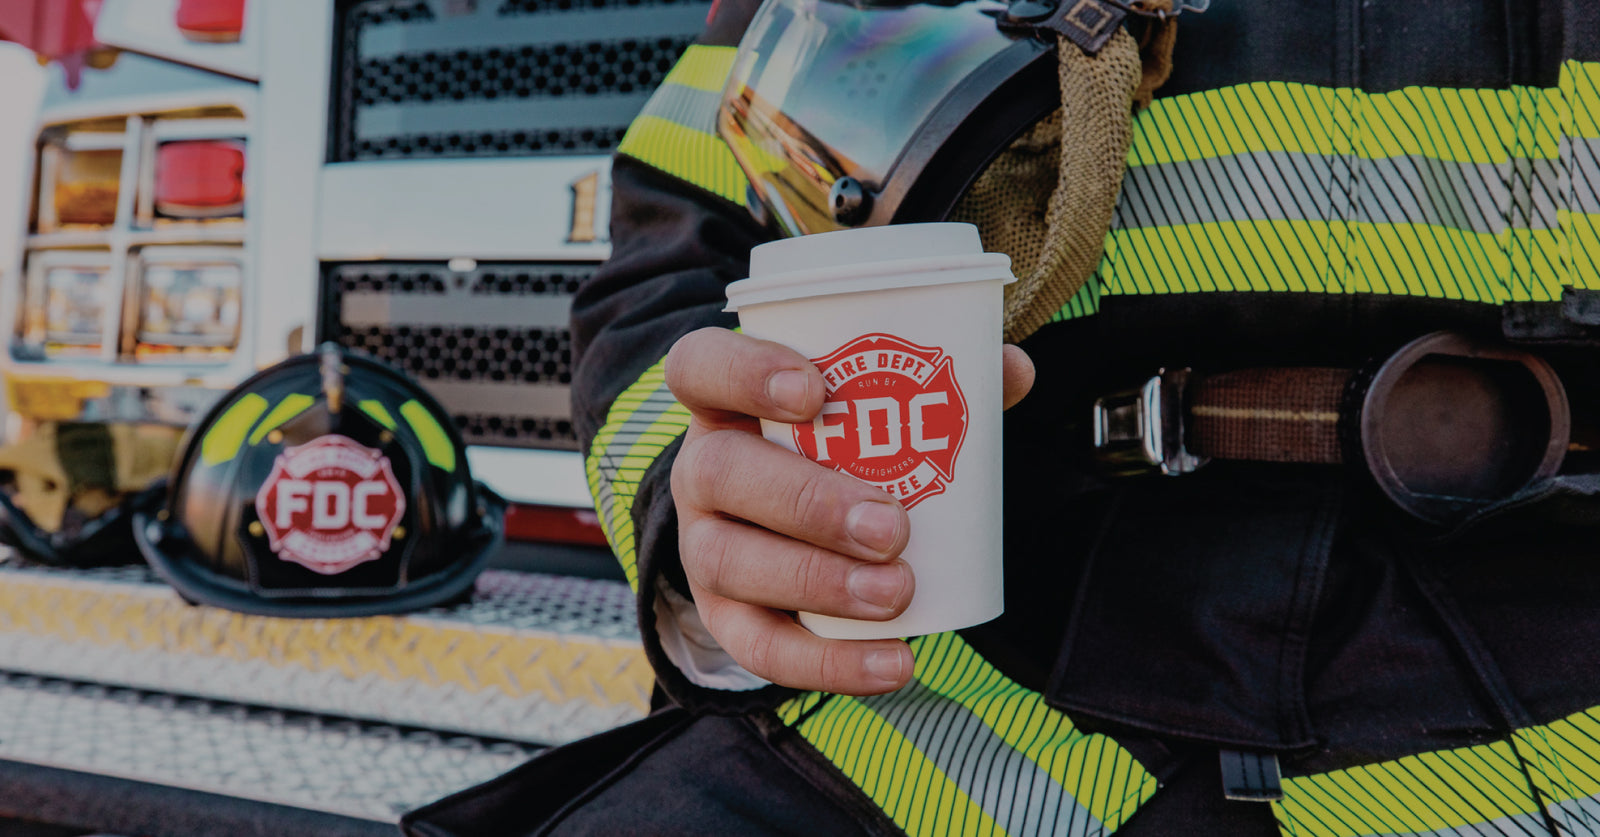 Enjoying Fire Department Coffee is a great way to support small businesses and first responders.